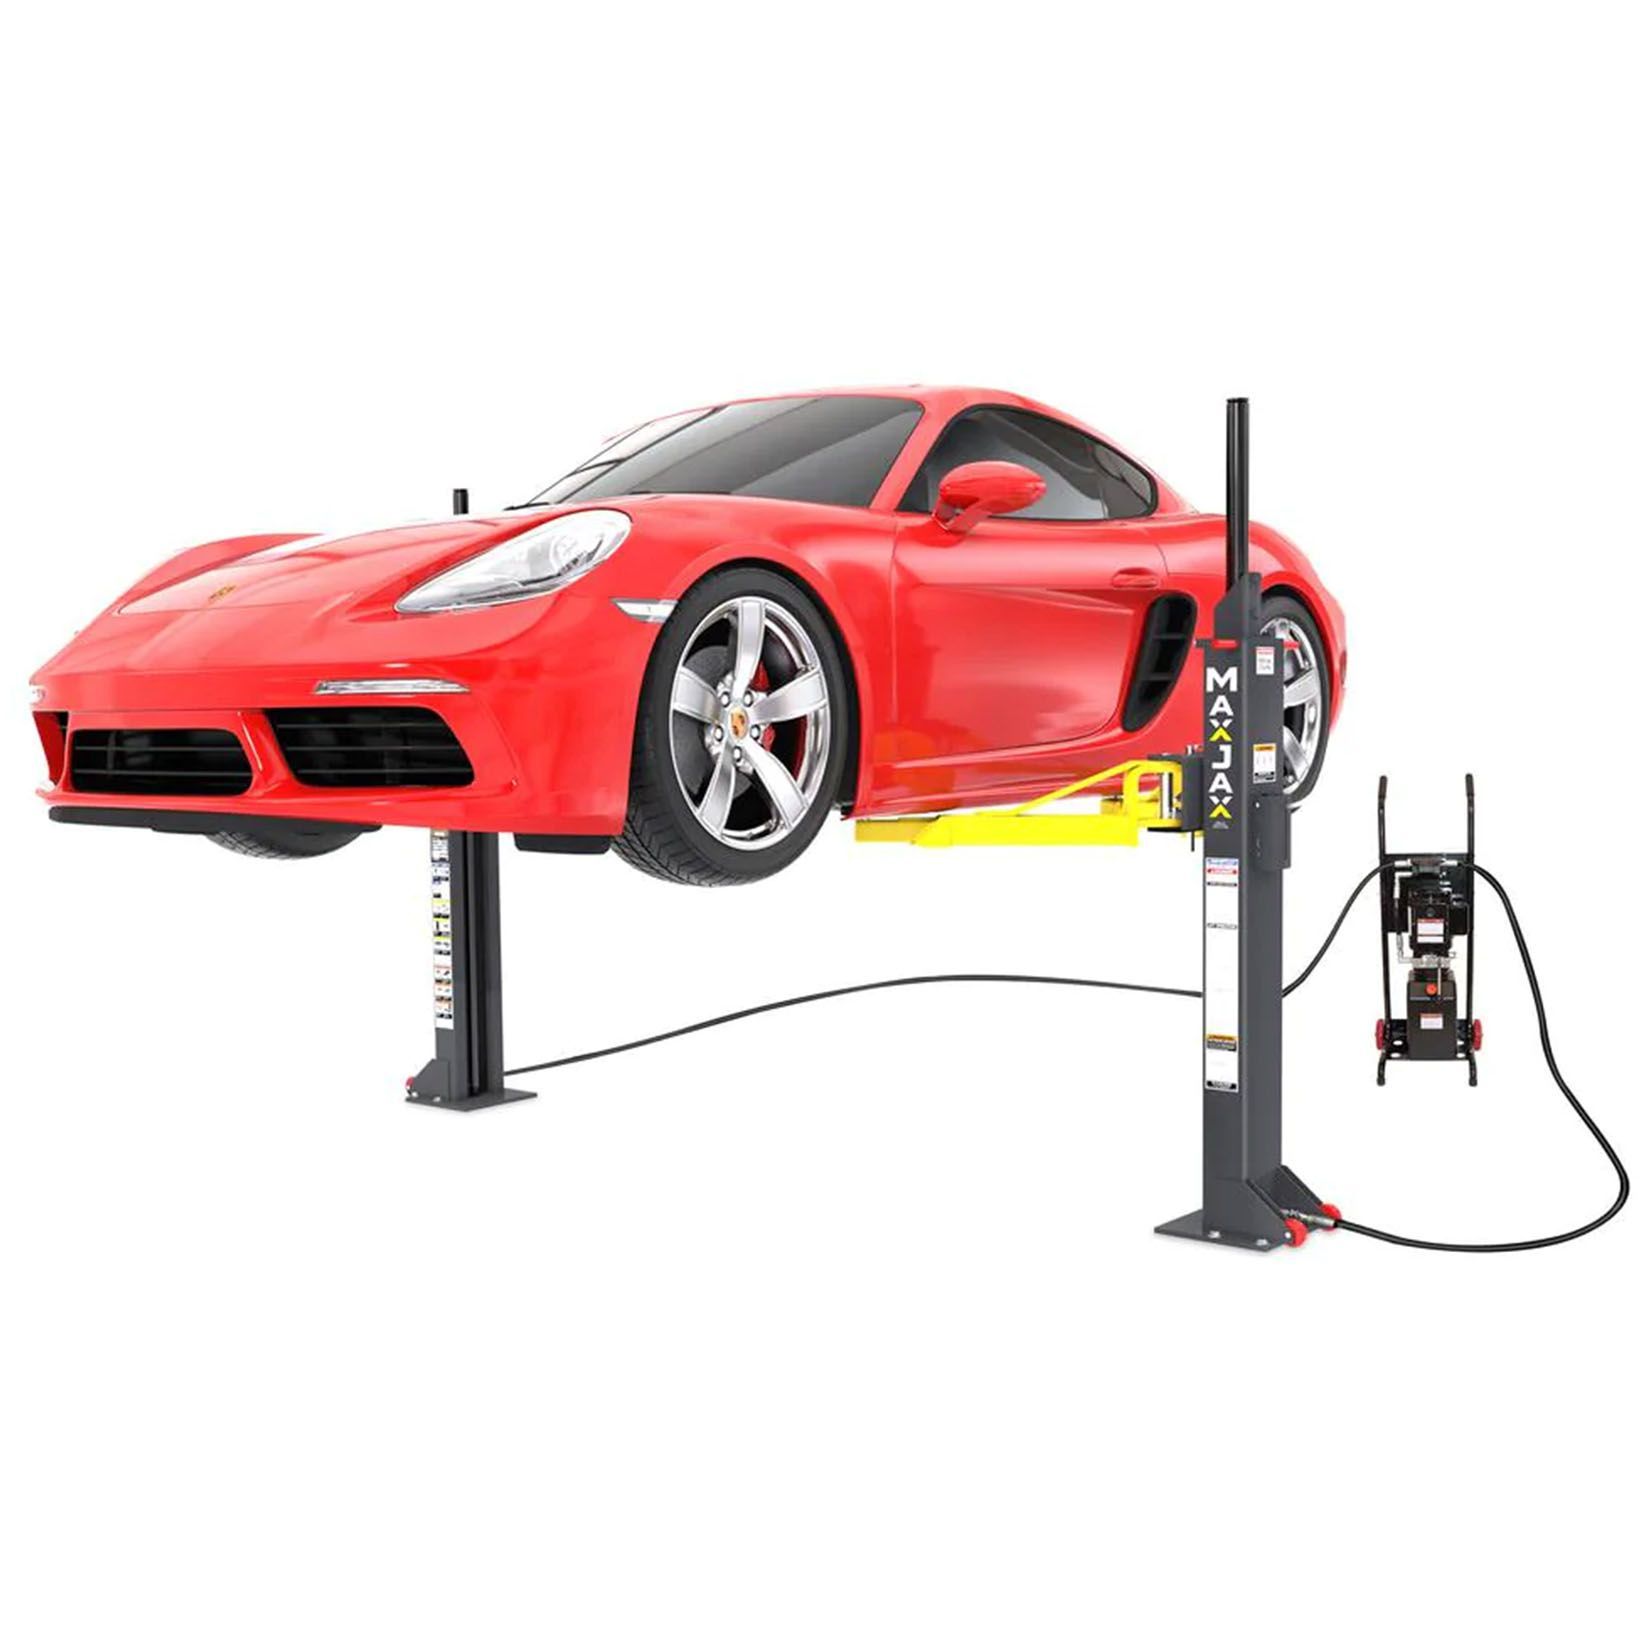 Vehicle Lifts For Your Home Garage, Best Auto Lift For Garage